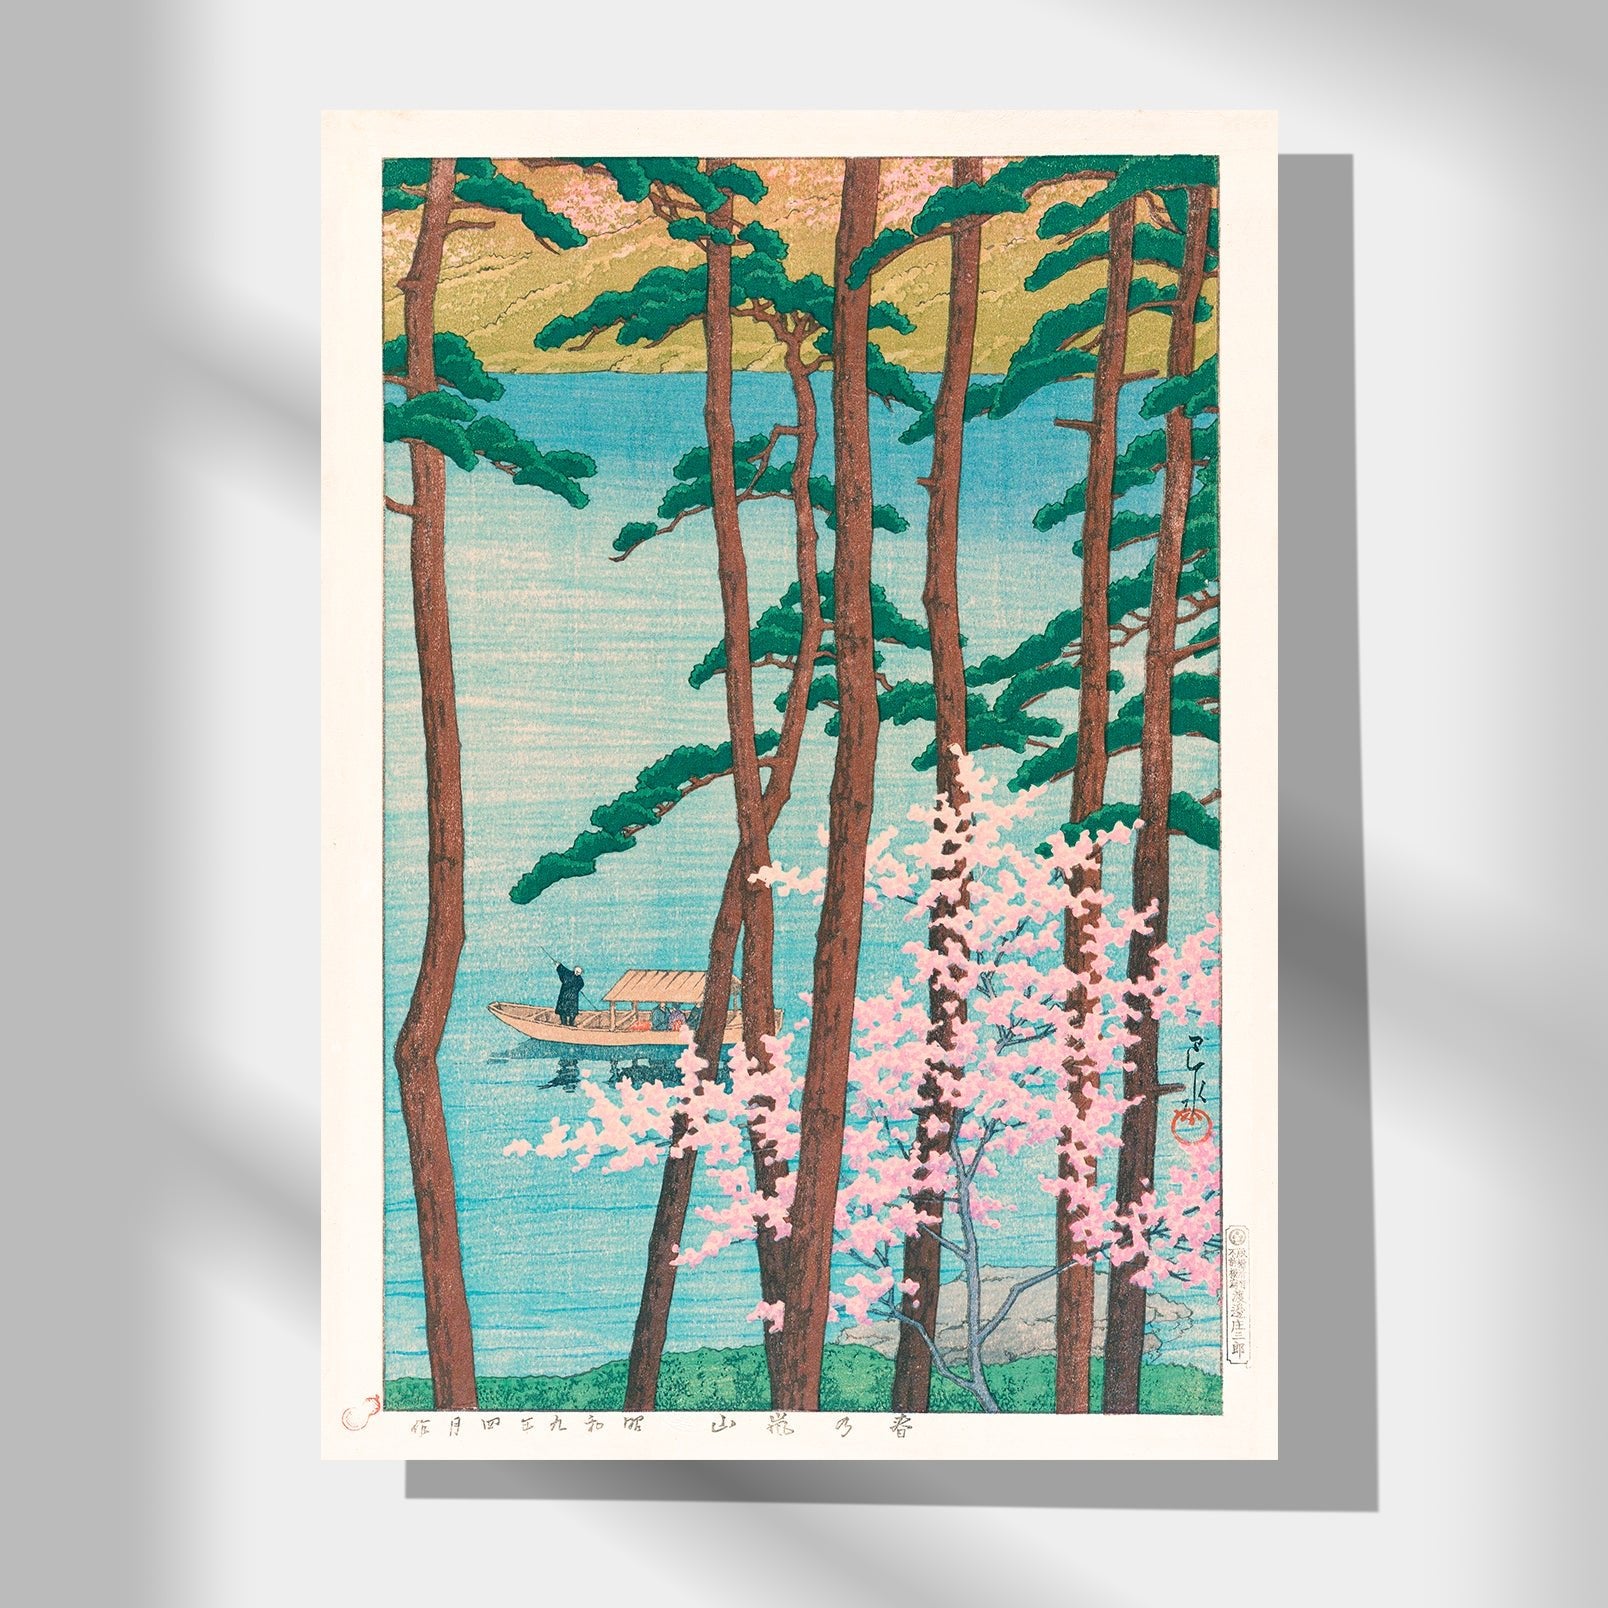 Kawase Hasui&#39;s Japanese Art Poster exhibits a boat sailing on water, surrounded by cherry trees in full bloom.